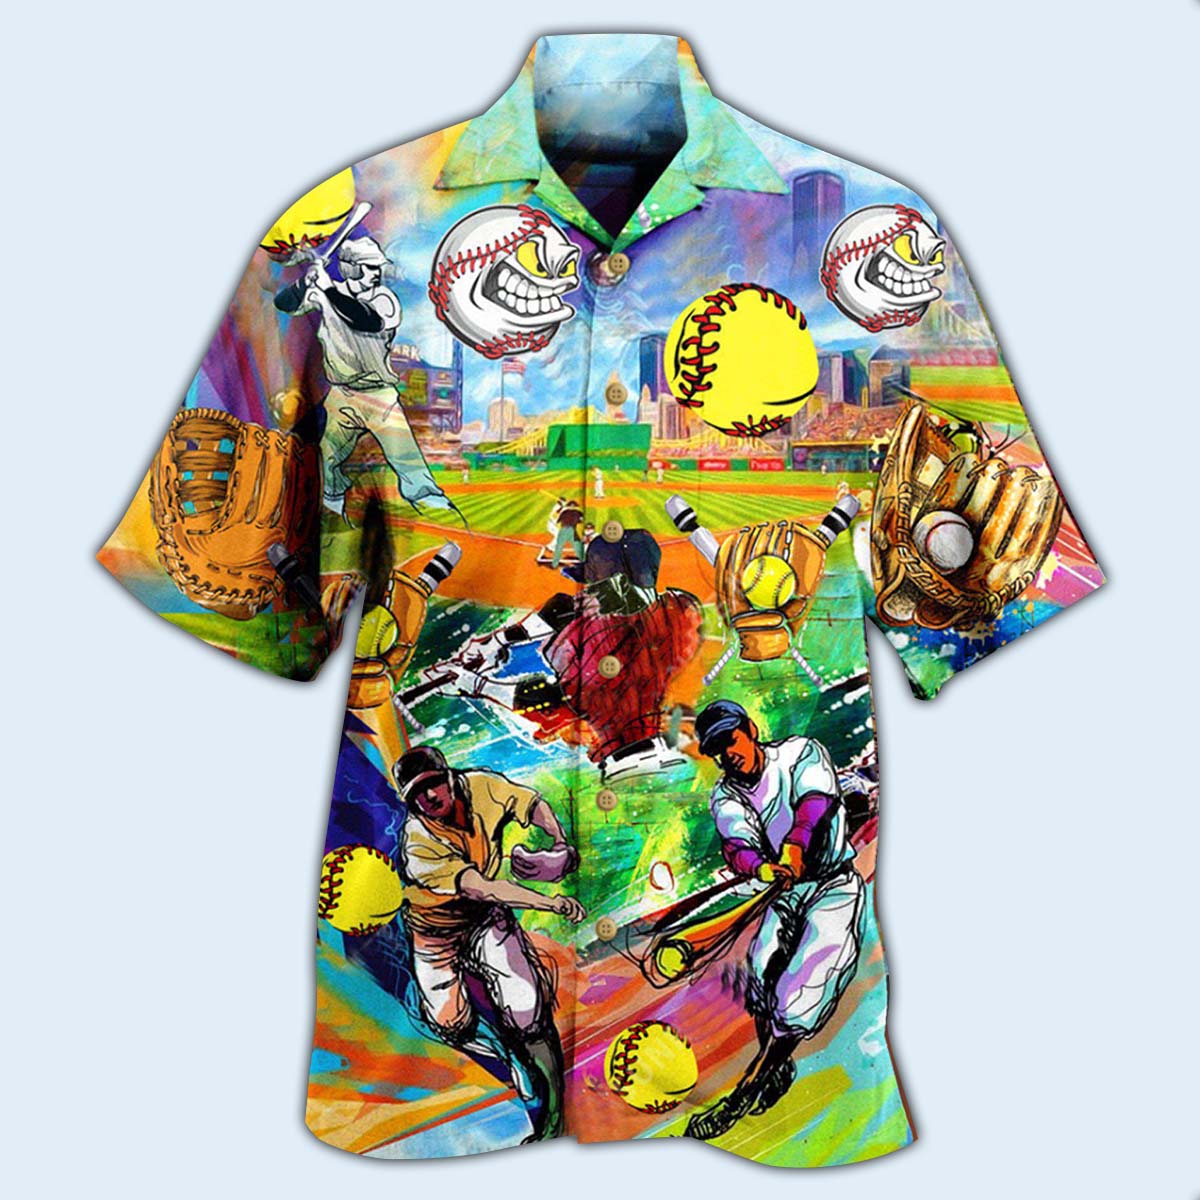 Baseball Our Youth Is Devoted To Something Called Passion - Hawaiian Shirt - Owls Matrix LTD